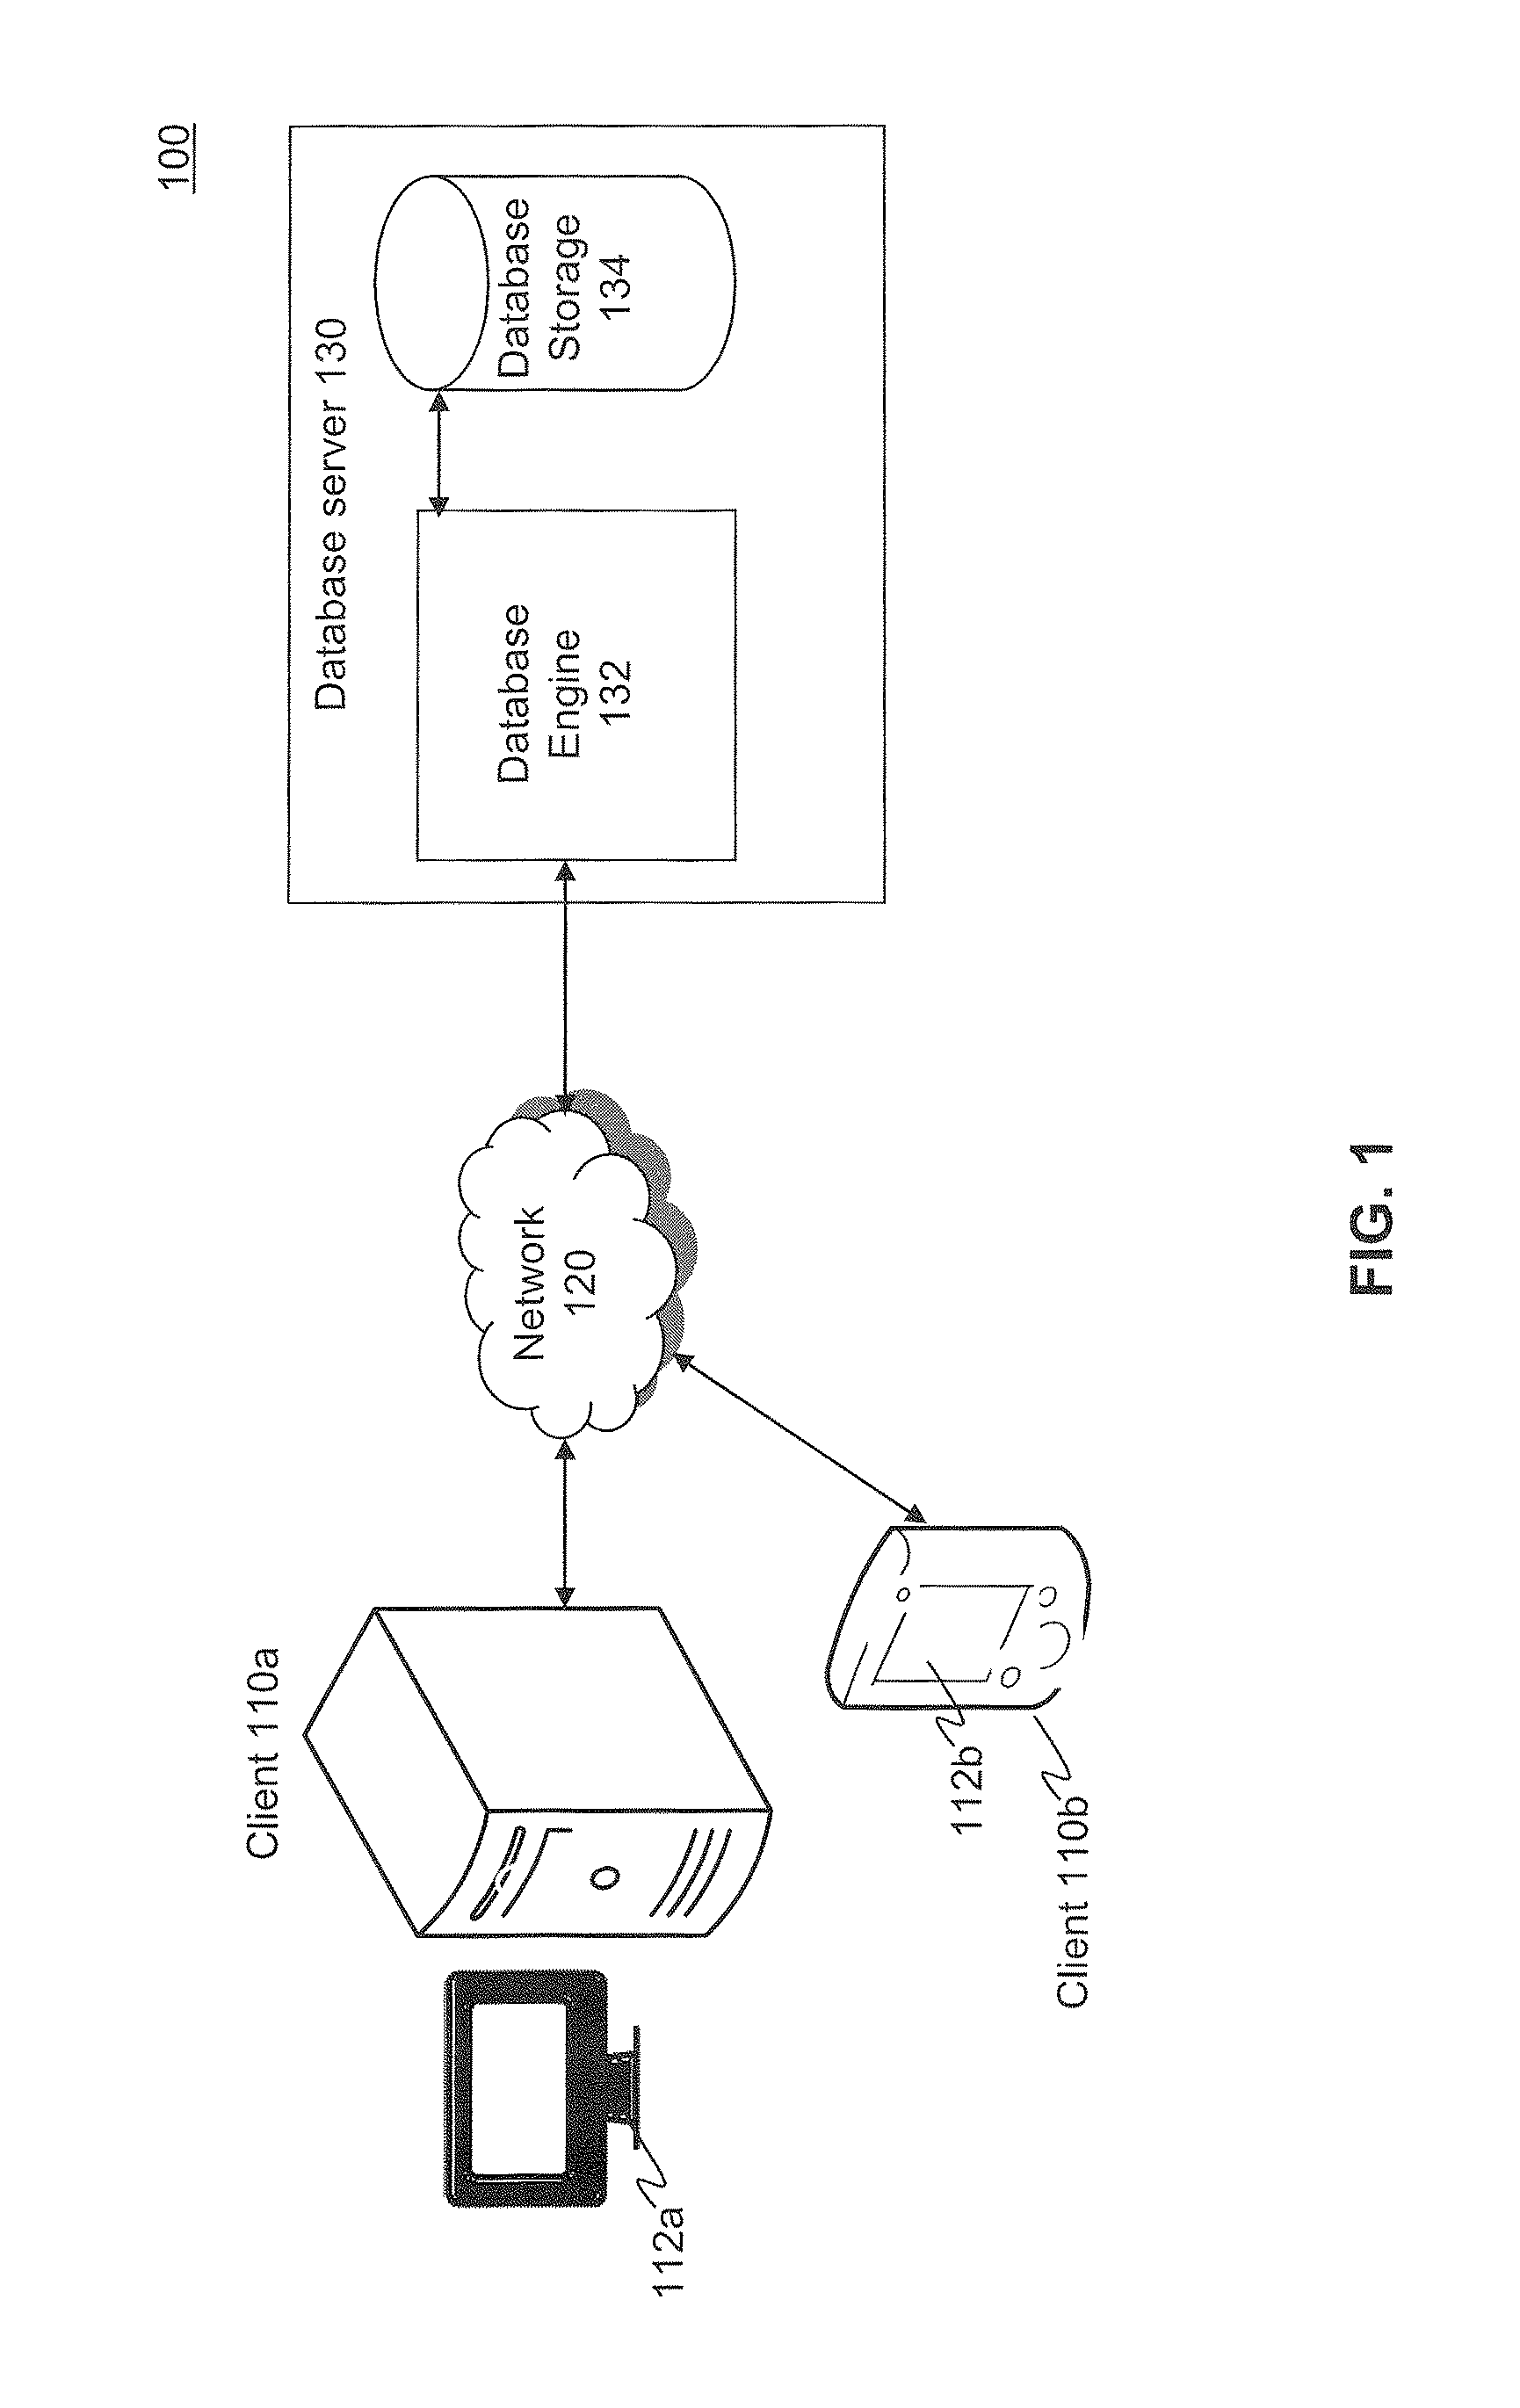 Indexing spatial data with a quadtree index having cost-based query decomposition